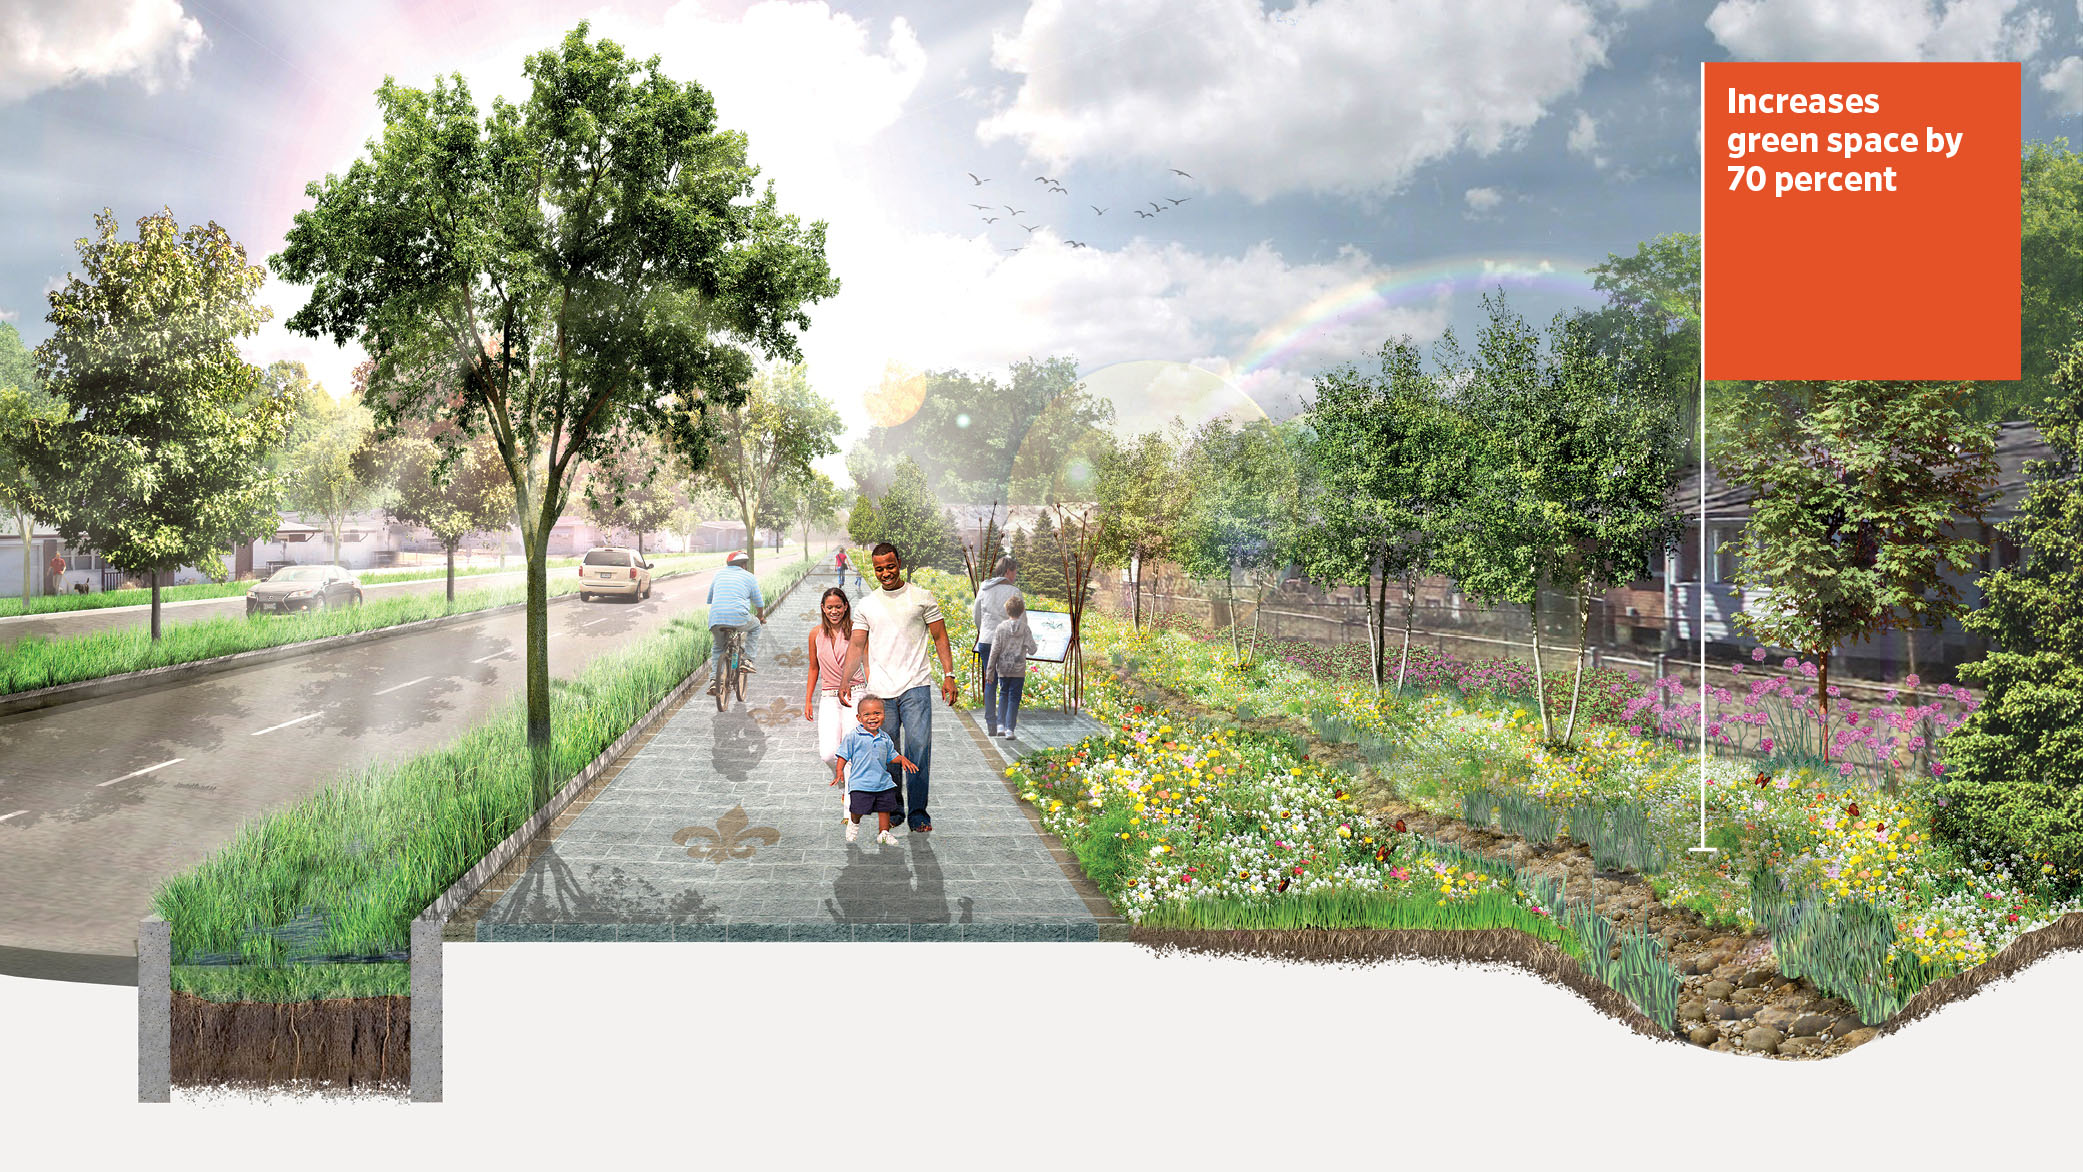 Rendering by SWT Design showing the West Florissant Avenue “Great Street” Initiative, a street with wide sidewalks, trees, and gardens.